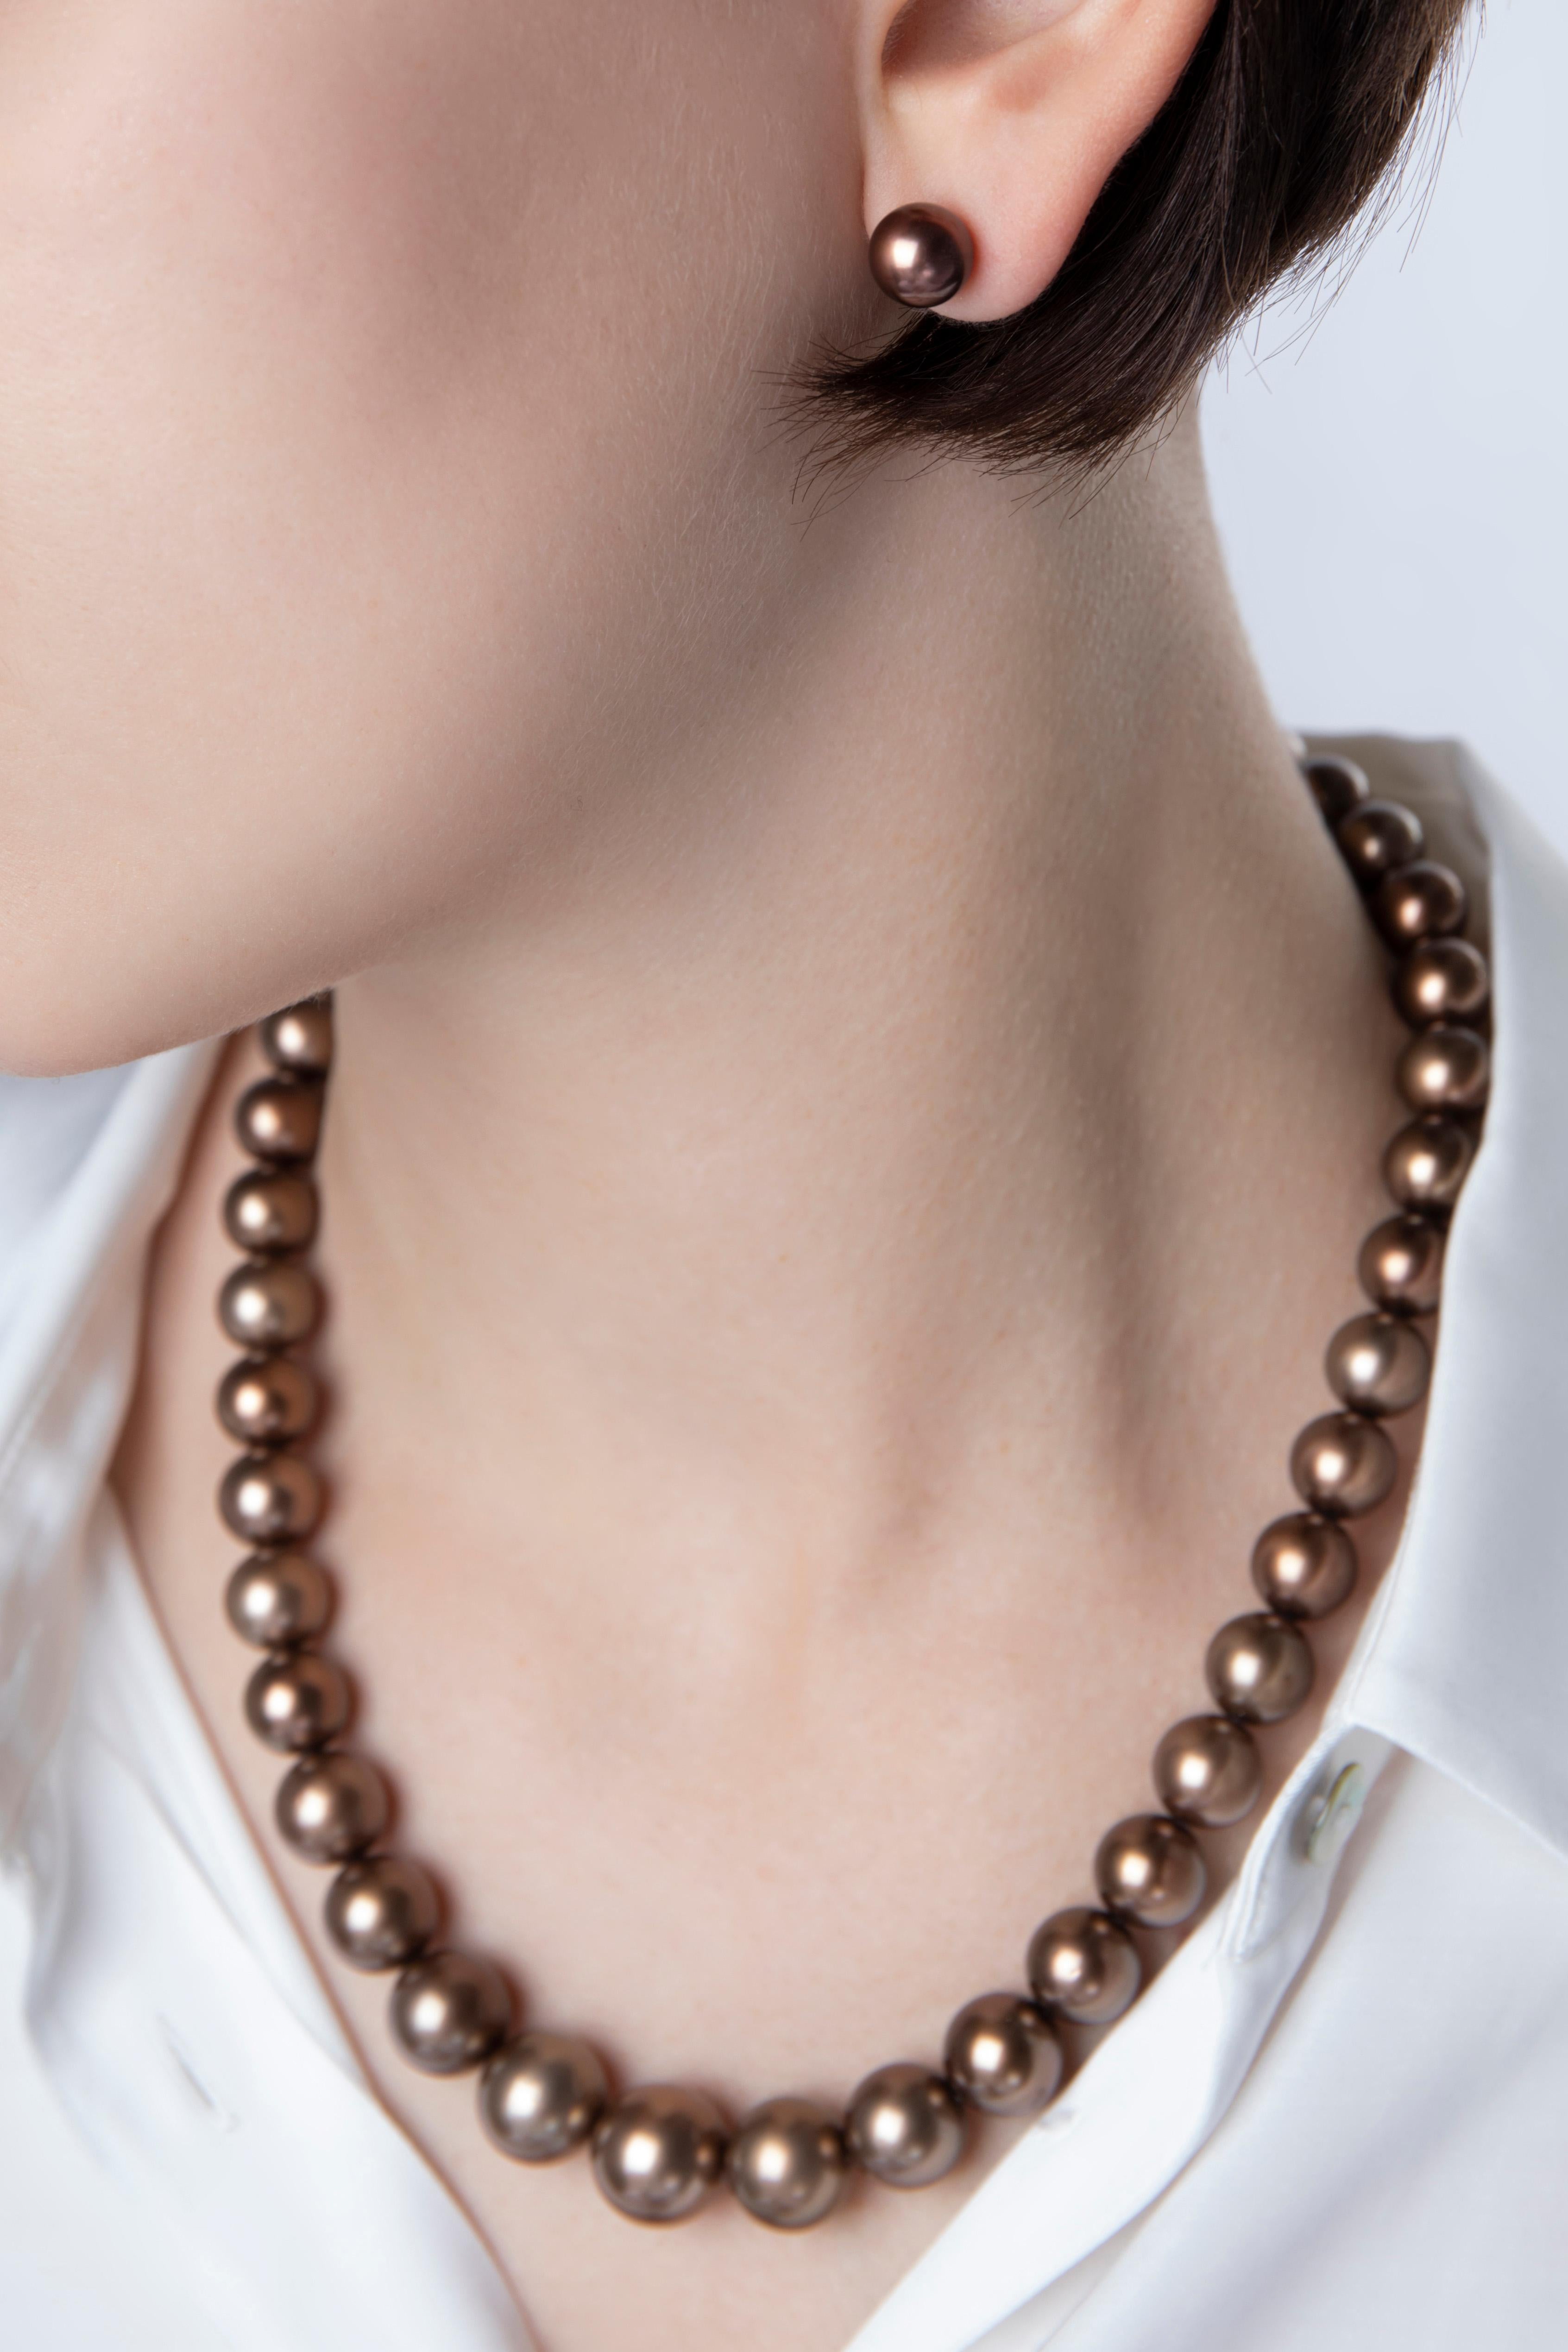 This exceptional necklace from Yoko London features brown Tahitian pearls which softly graduate in size. Each pearl is meticulously matched by attributes such as size, shade and lustre by experts in our London atelier. To achieve the spectacular and